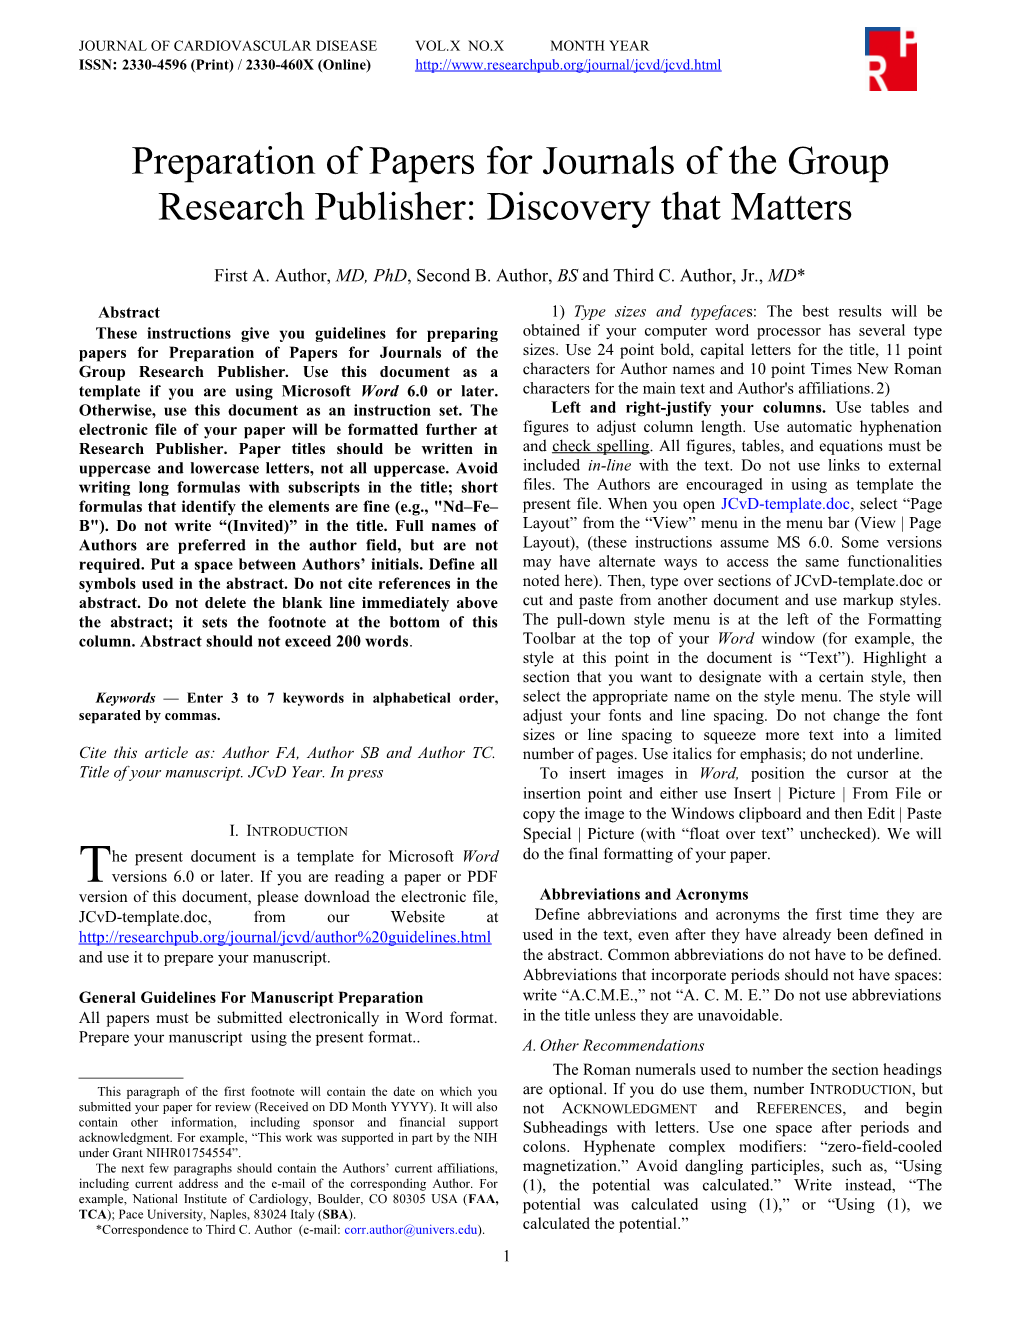 Preparation of Papers for Journals of the Group Research Publisher: Discovery That Matters